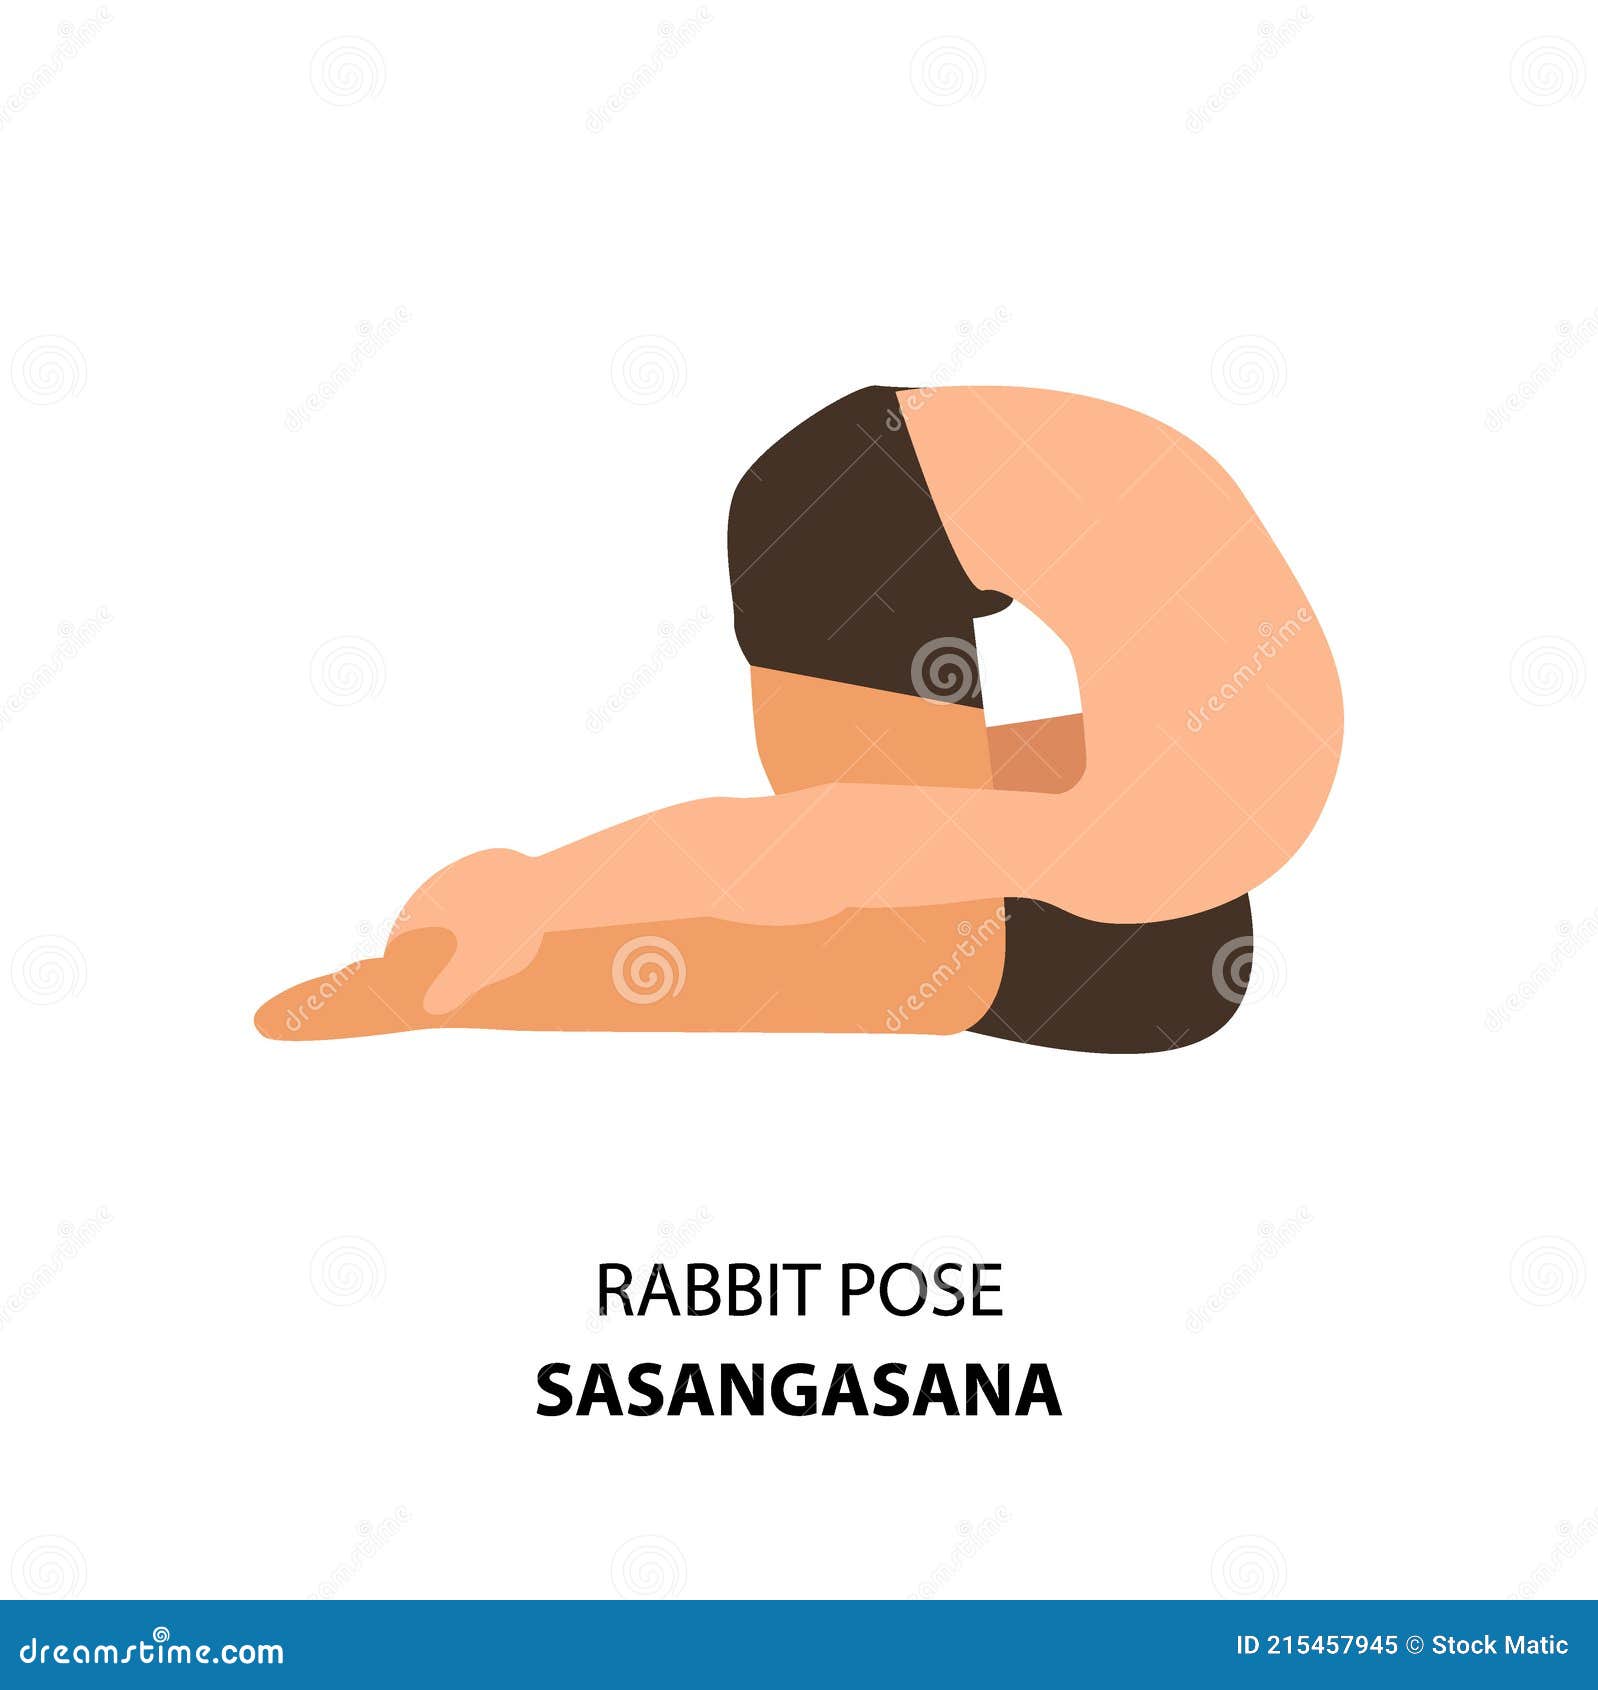 Rabbit Pose - Children Inspired by Yoga - Pose of the week